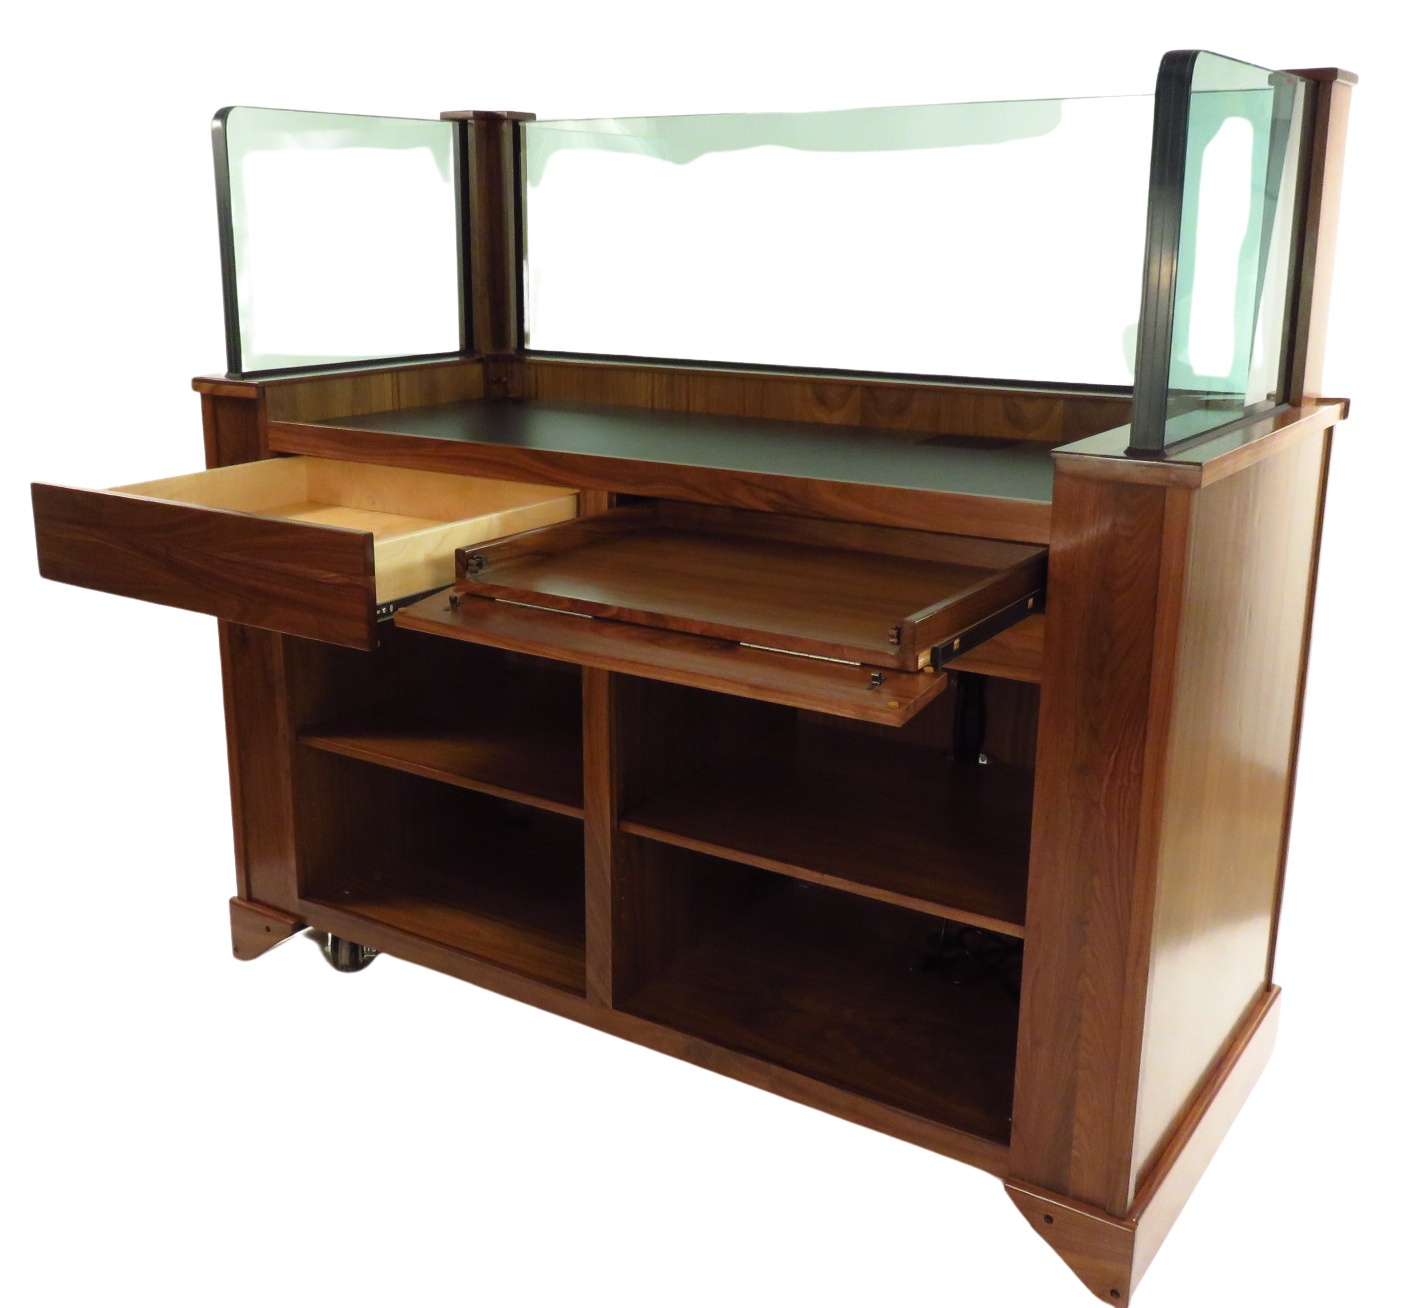 PRO360-W Protector Command Center Walnut 12 inch Glass - drawers open